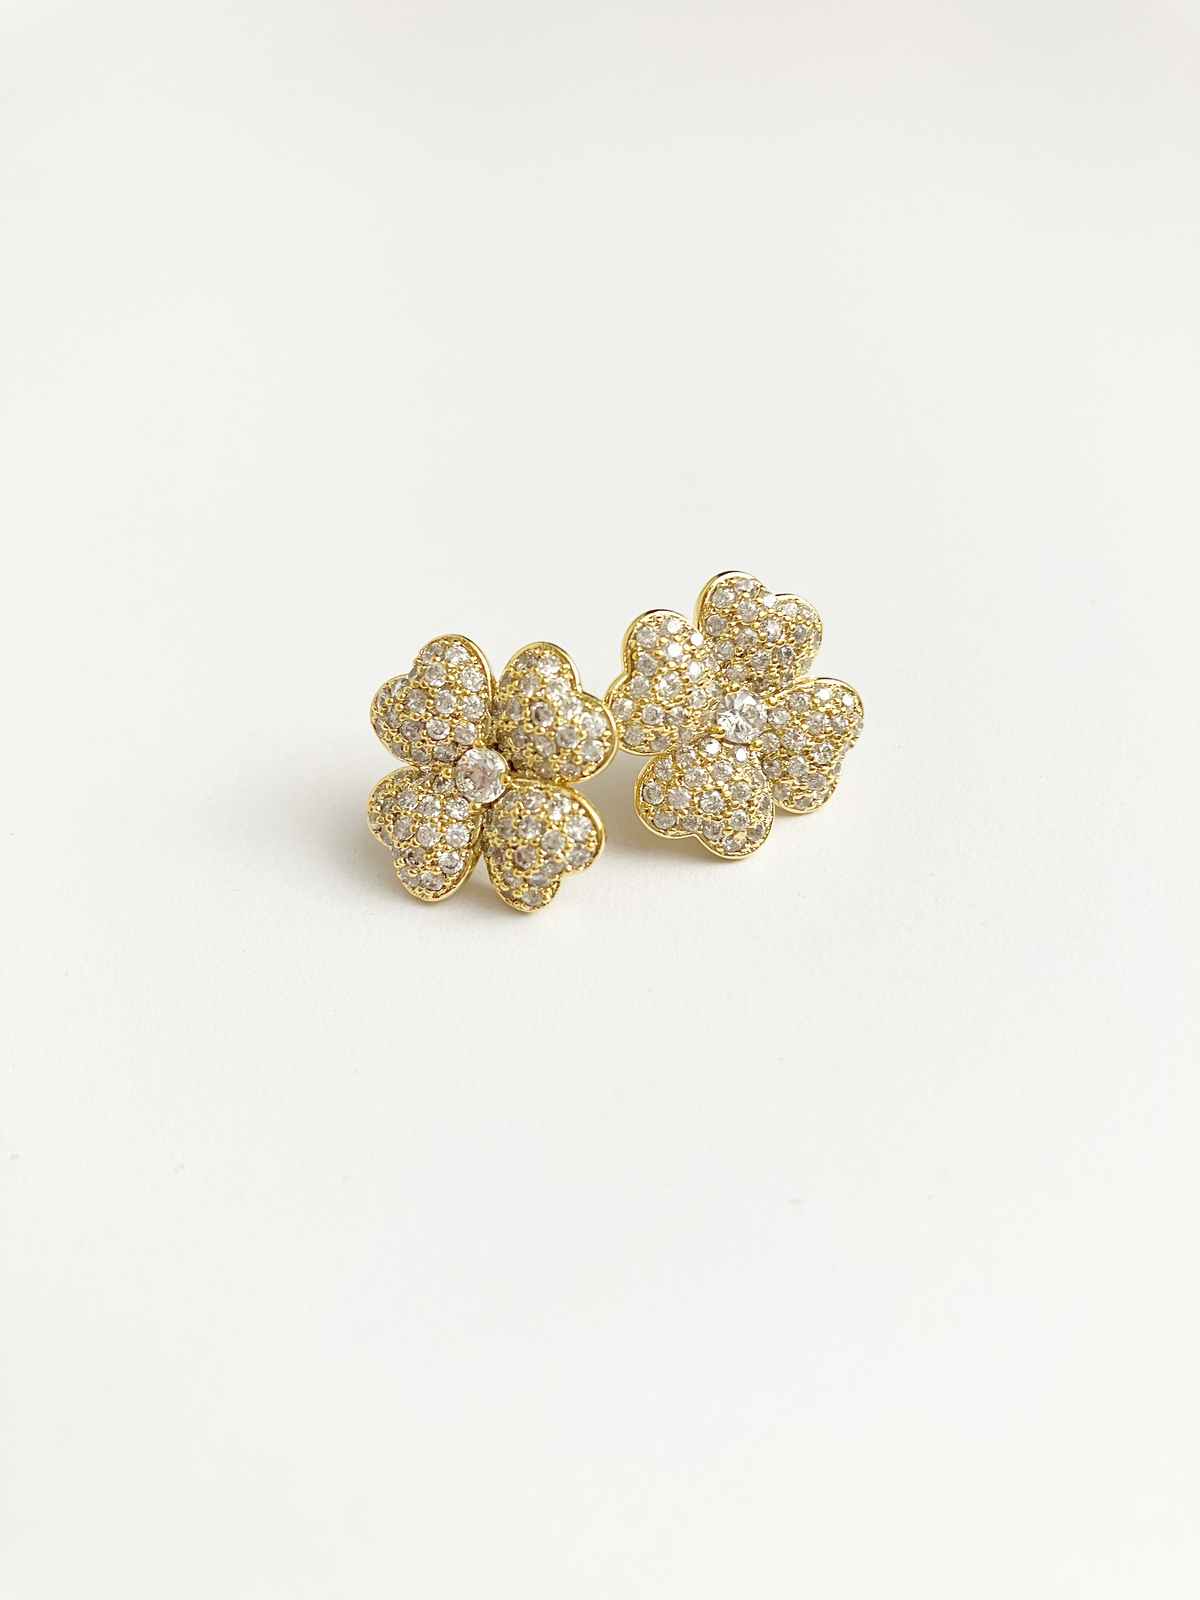 Primary image for Four Leaf Clover of Hearts Earrings in Gold and Cubic Zirconium 